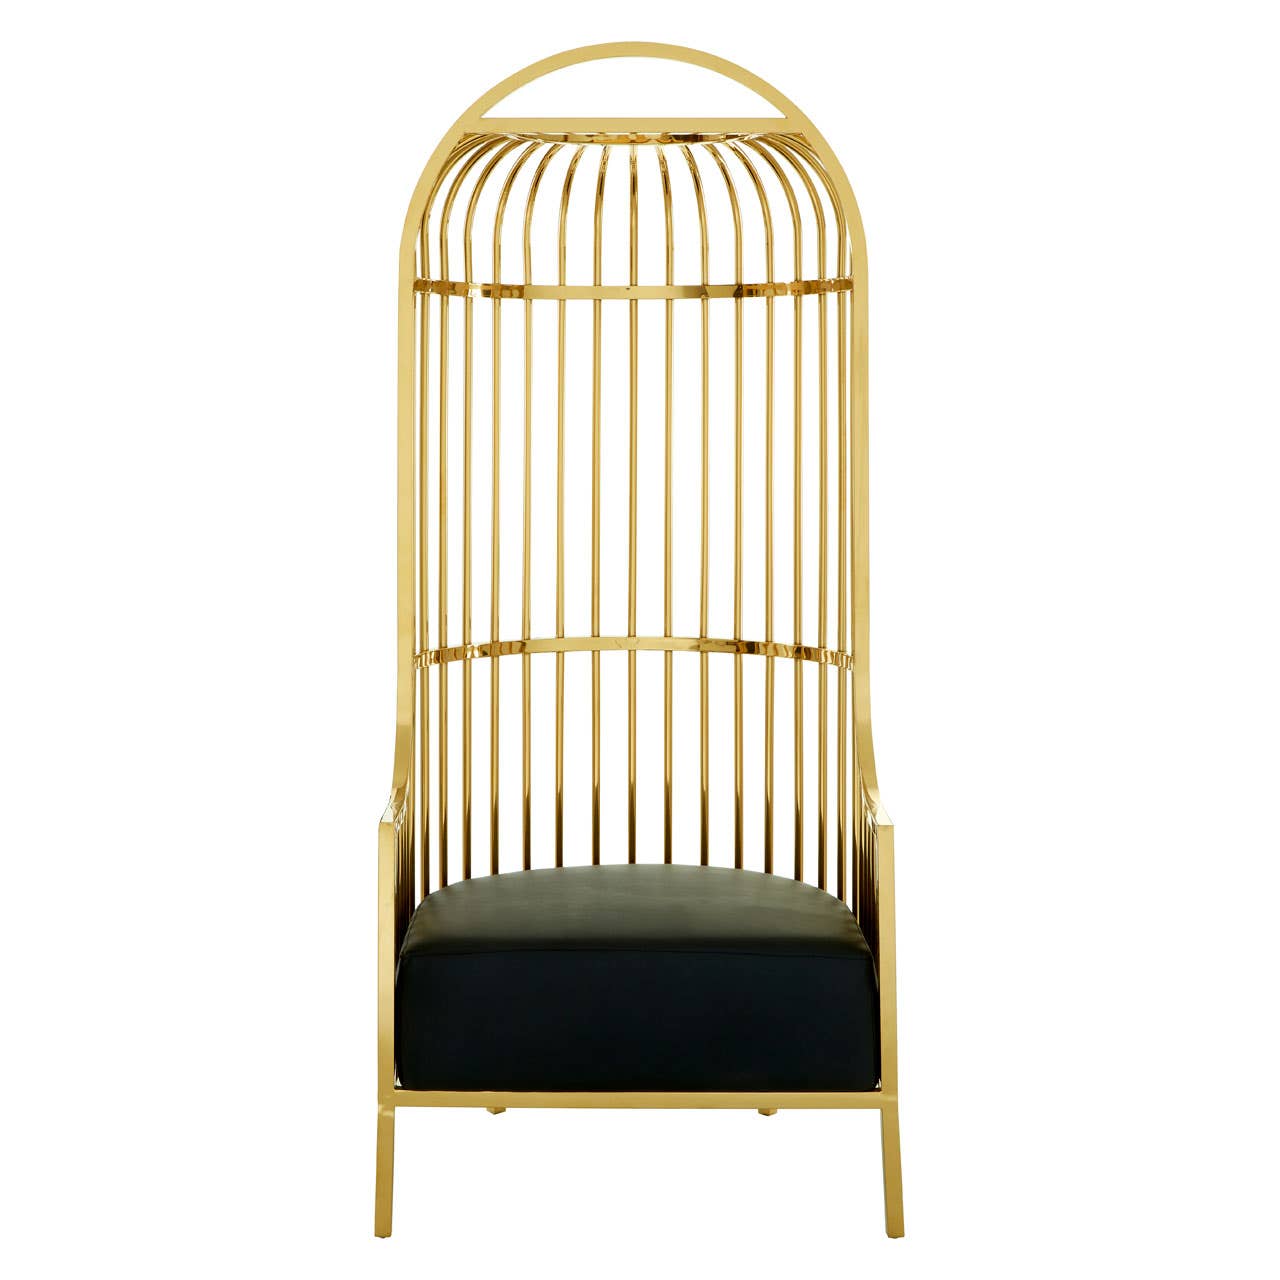 Eliza Gold Finish Dome Cage Chair